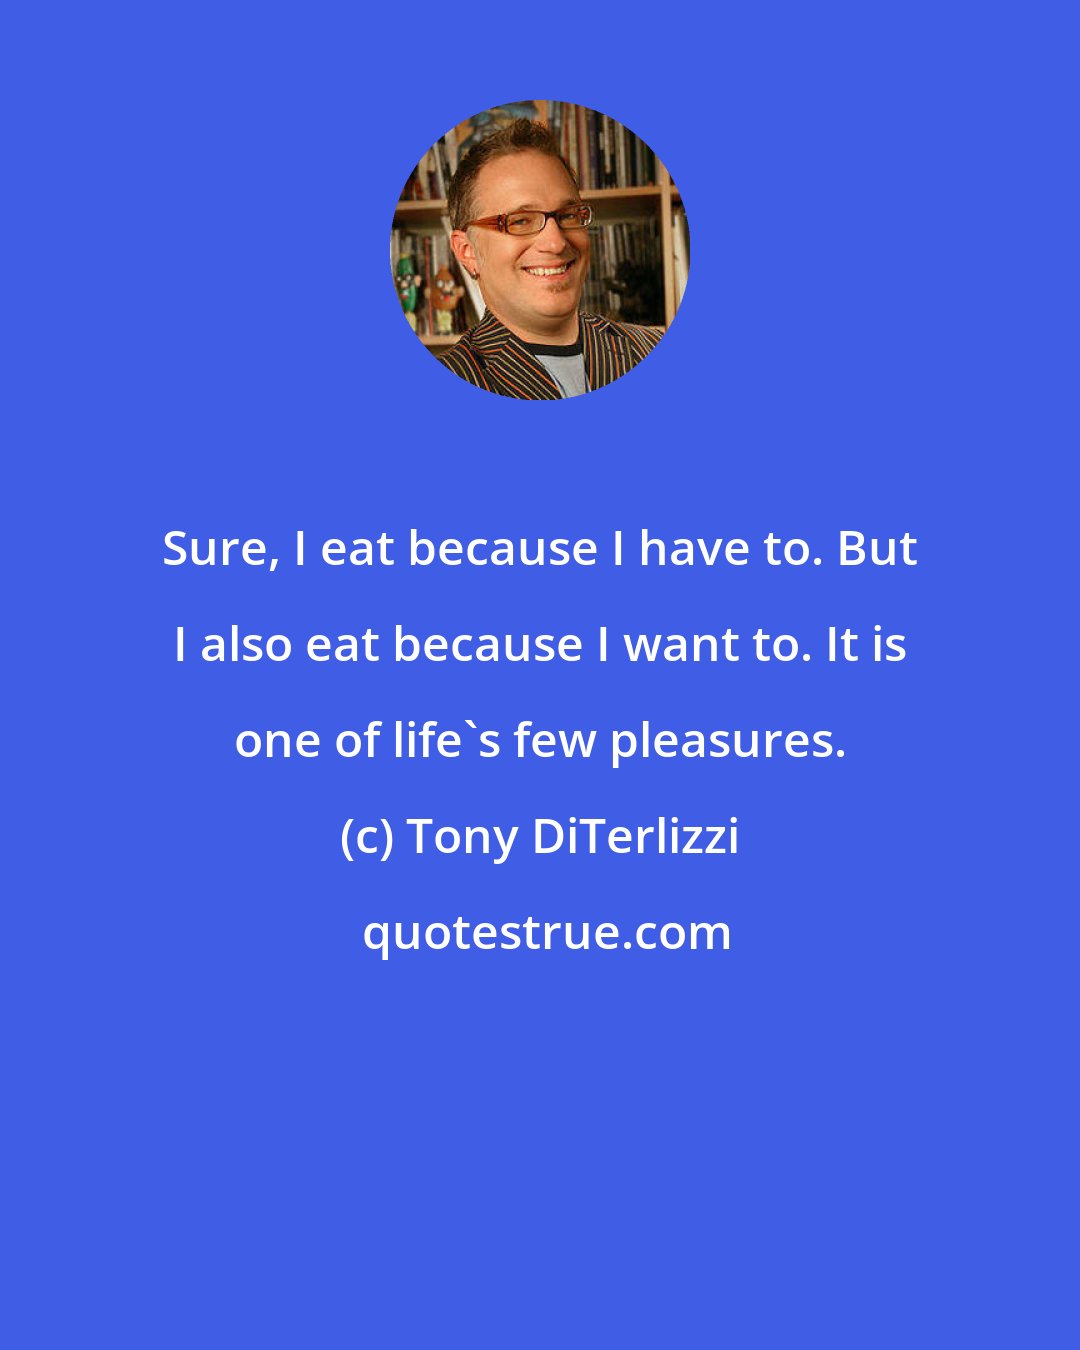 Tony DiTerlizzi: Sure, I eat because I have to. But I also eat because I want to. It is one of life's few pleasures.